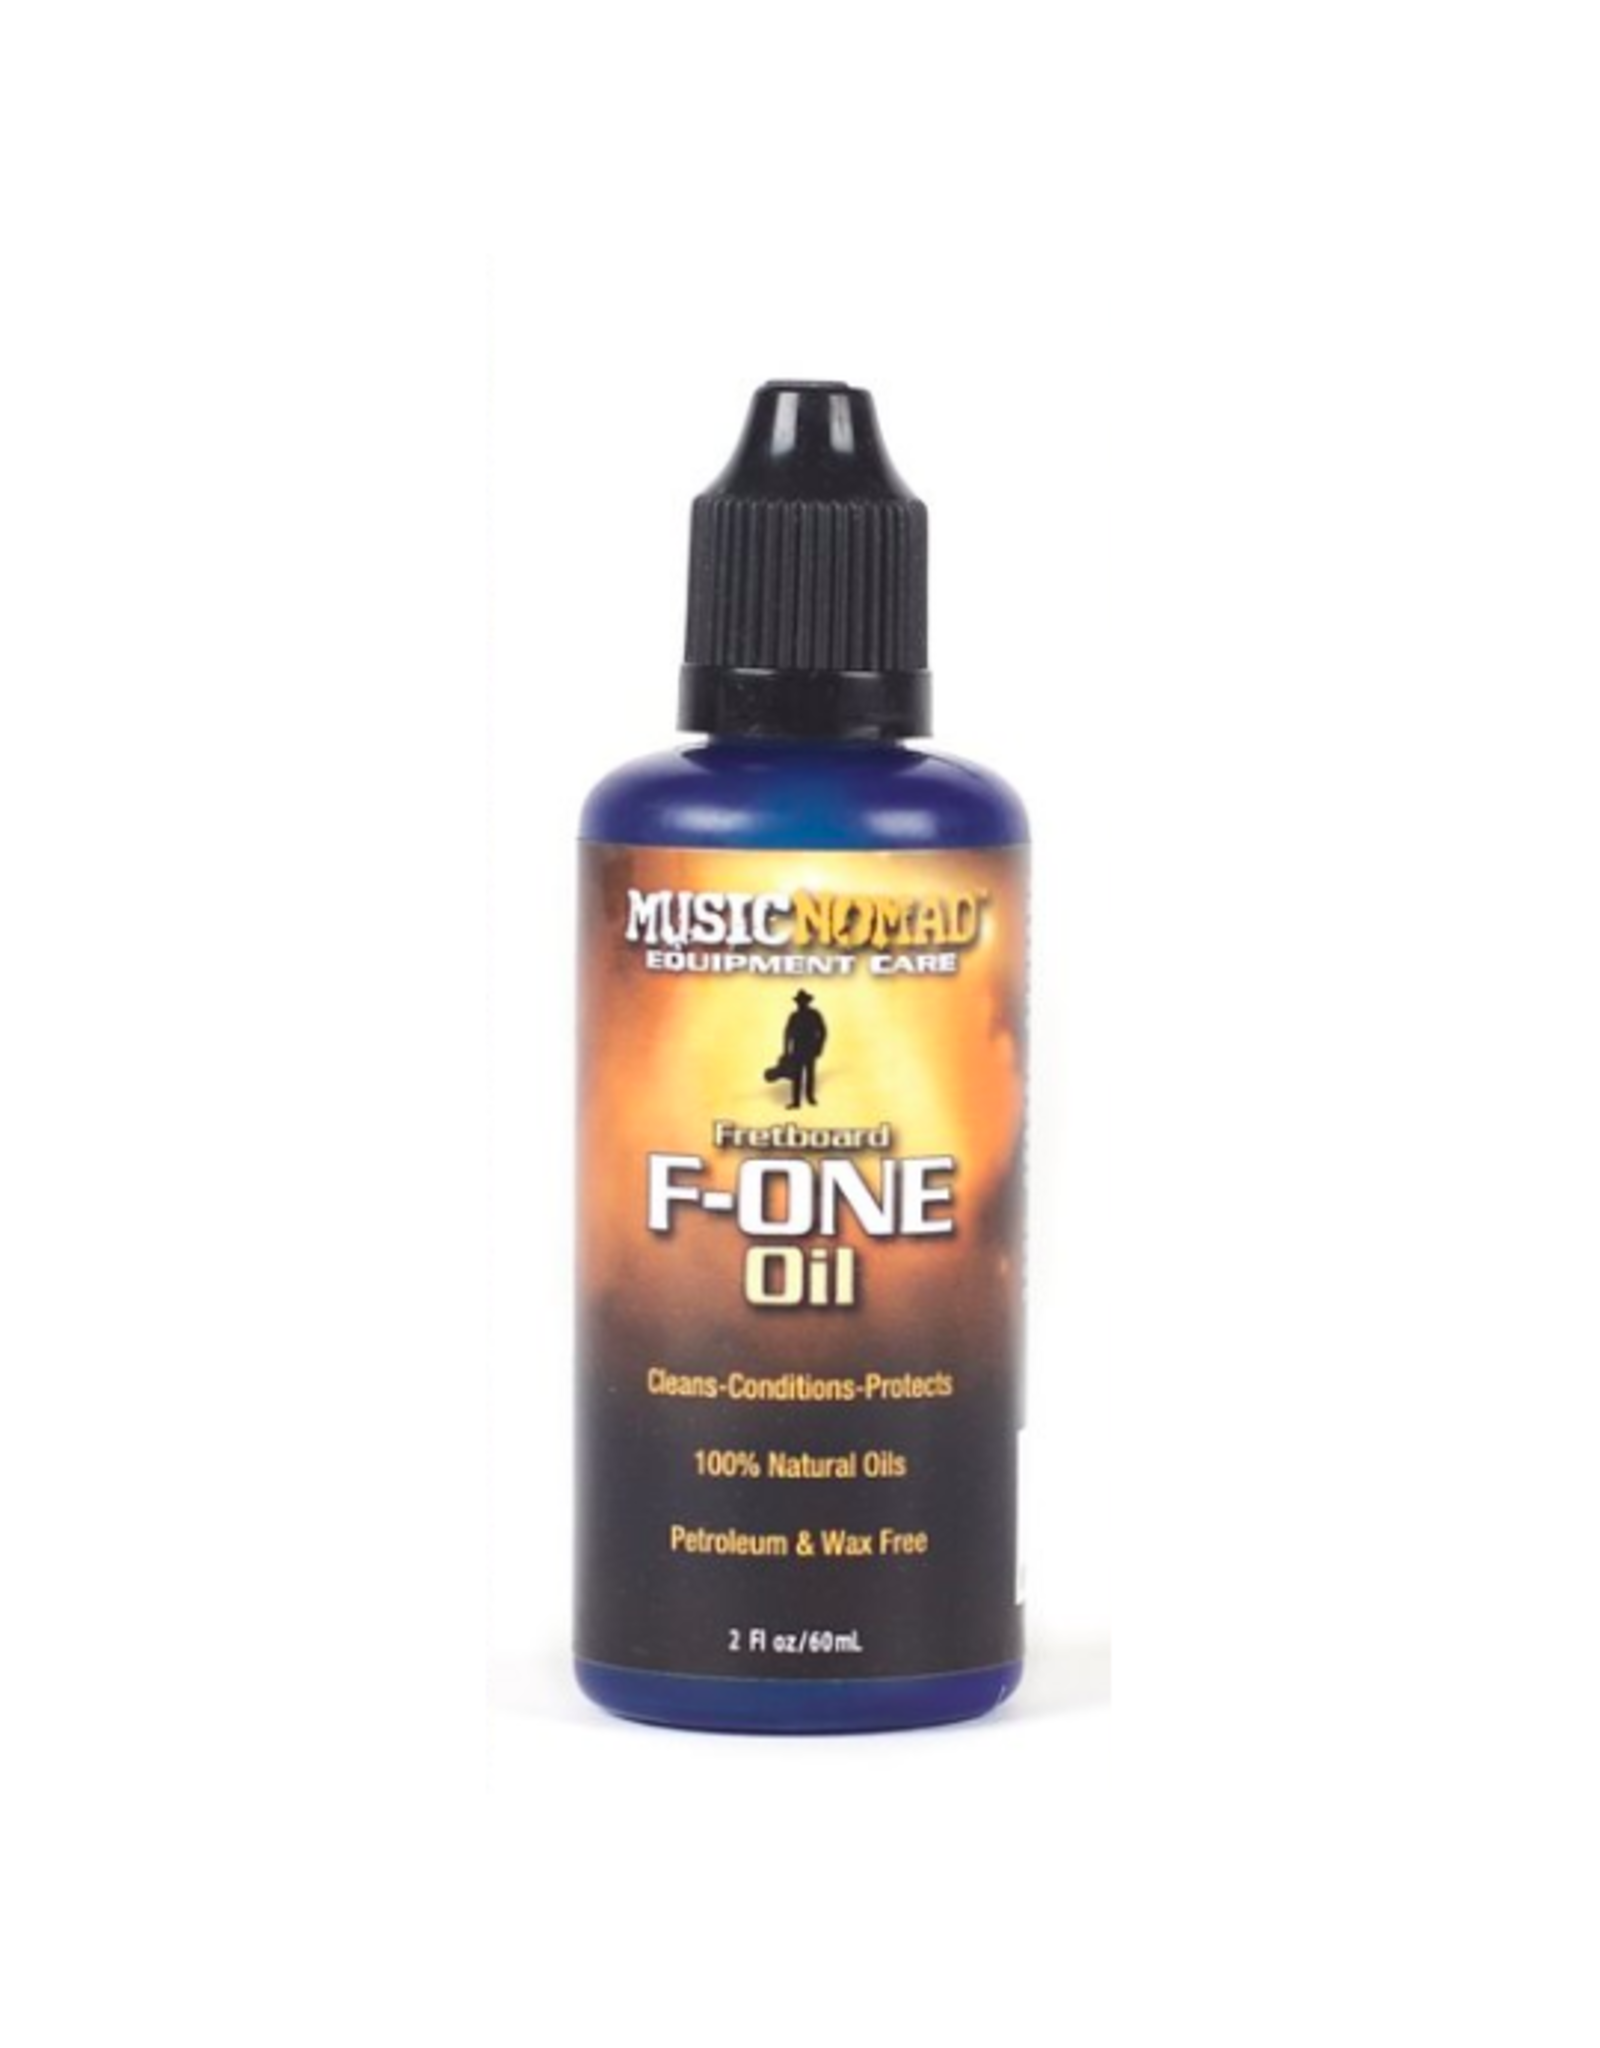 MUSIC NOMAD Music Nomad Fretboard F-ONE Oil - Cleaner & Conditioner 2 oz